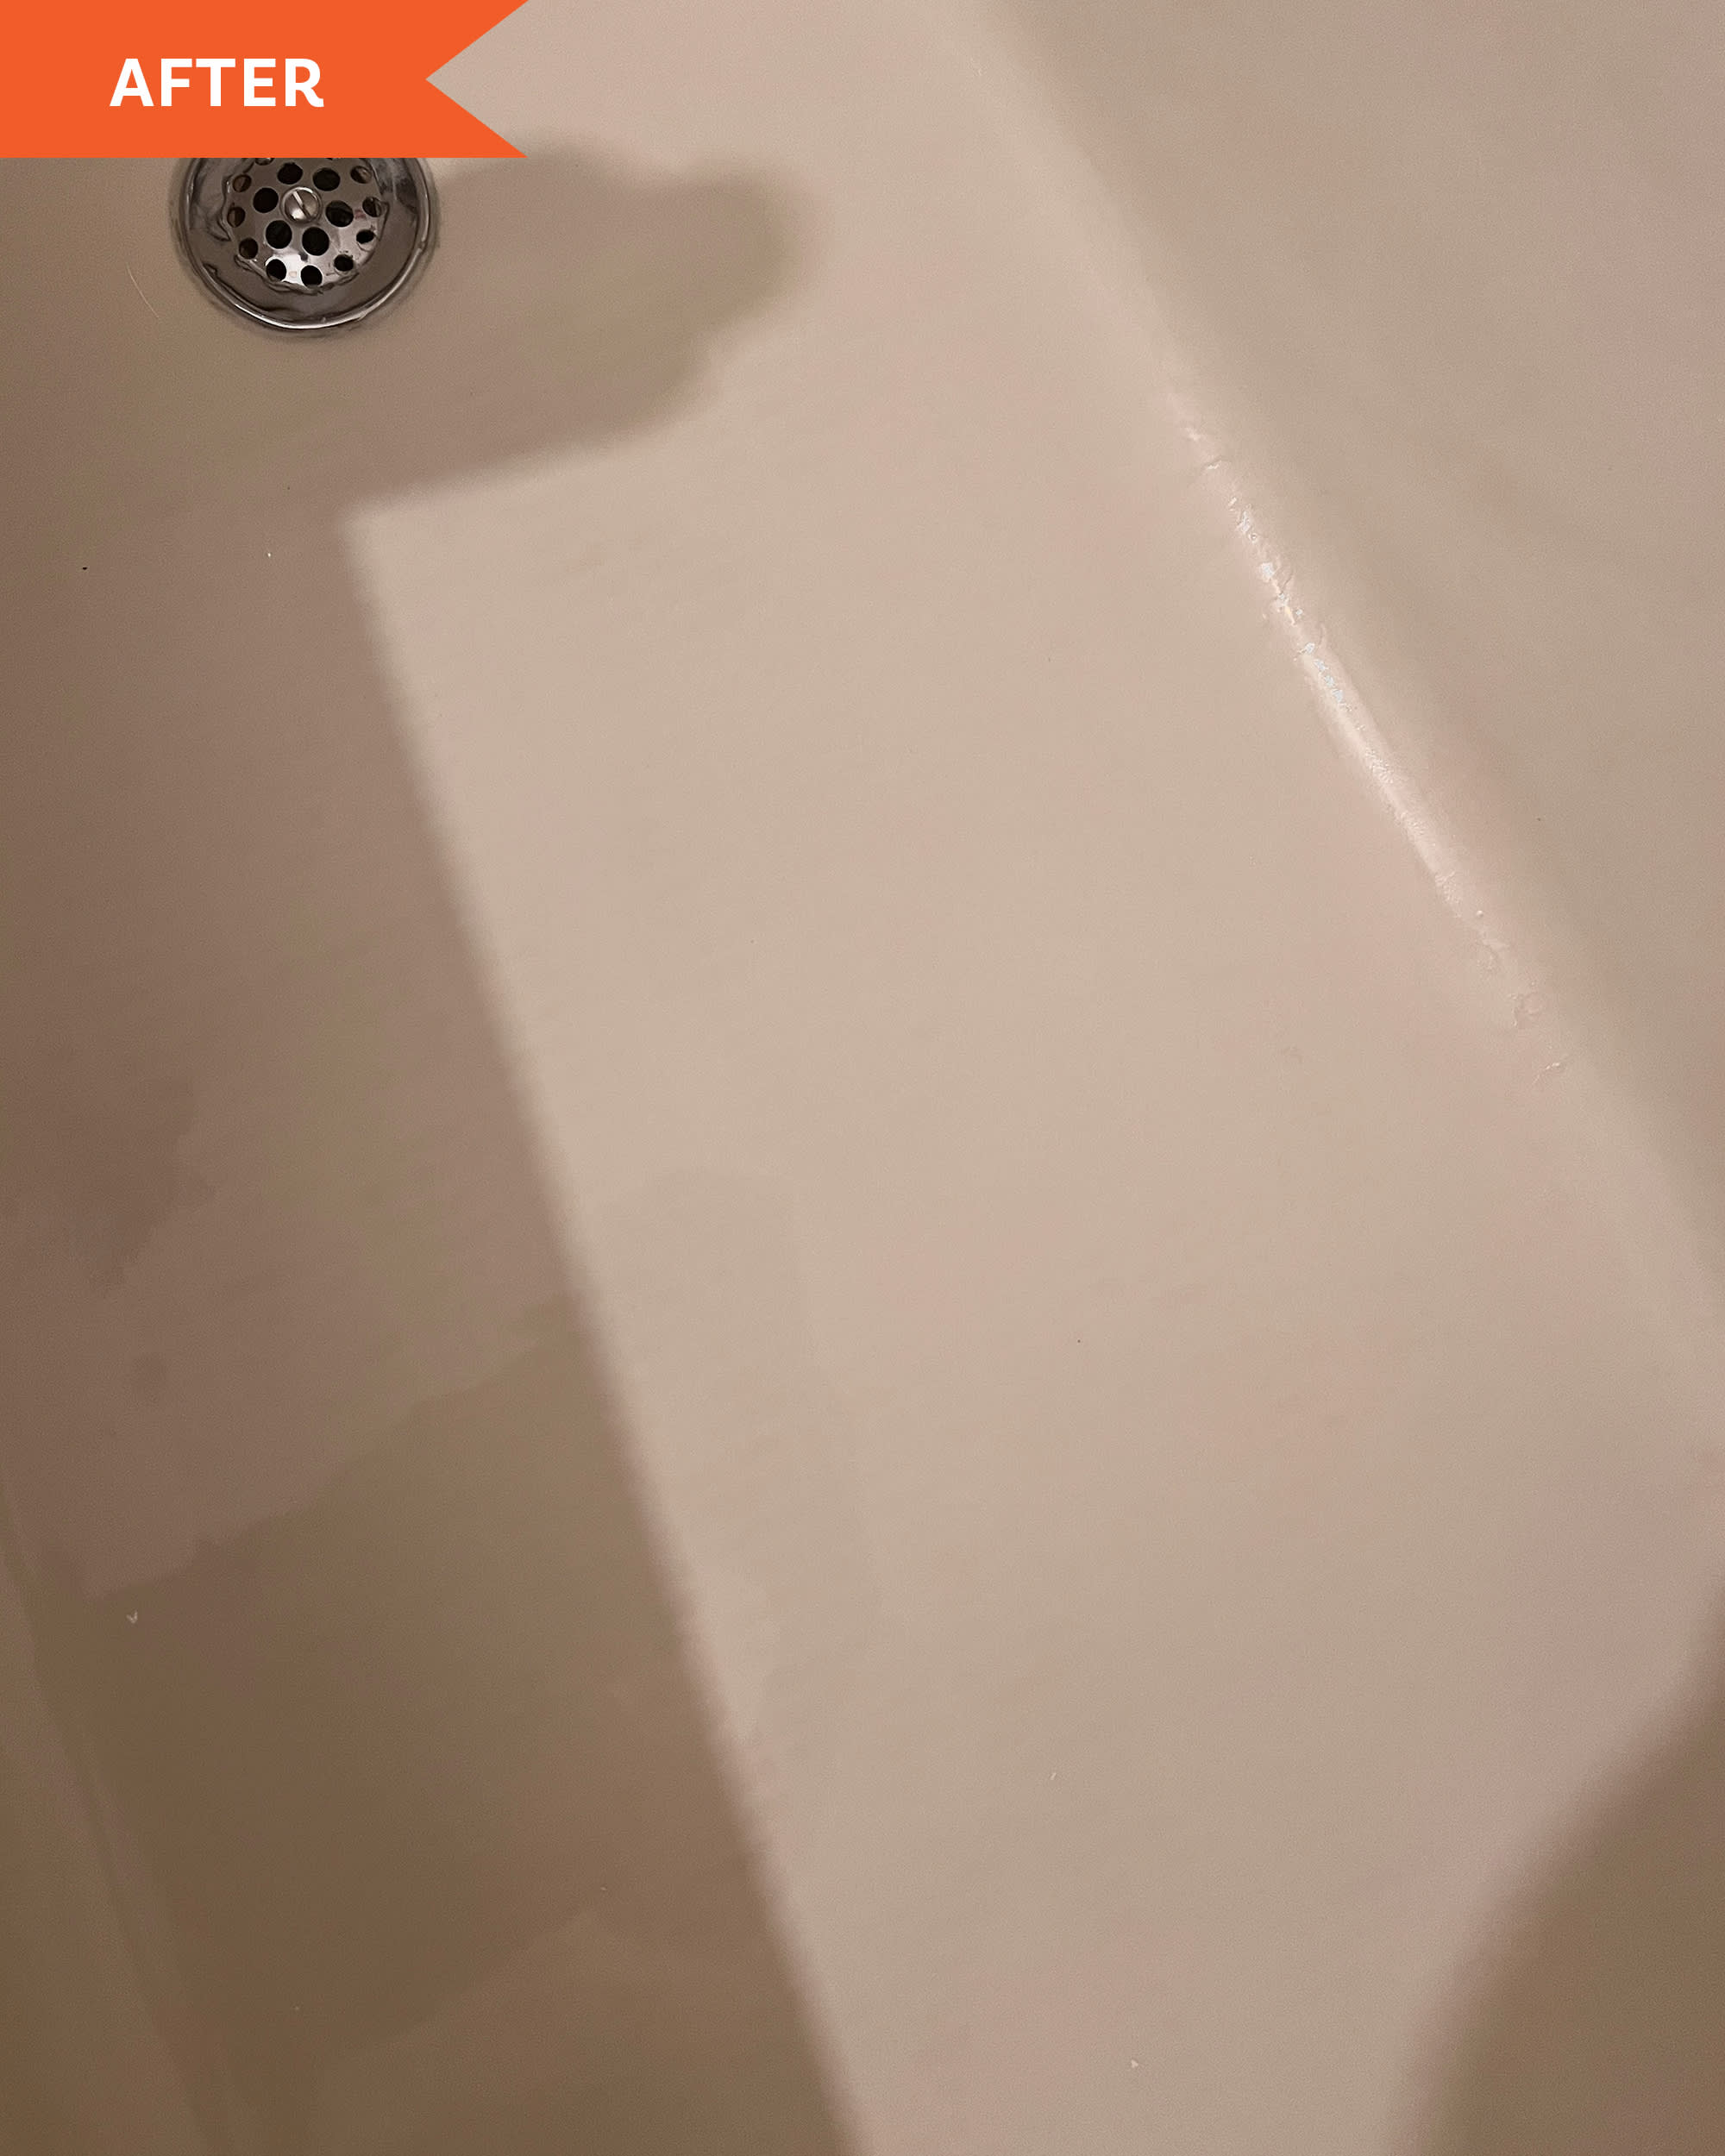 https://cdn.apartmenttherapy.info/image/upload/v1661349073/k/Edit/2022-08-Electric-Spin-Scrubber-Review/bathtub_2-after-tagged.jpg